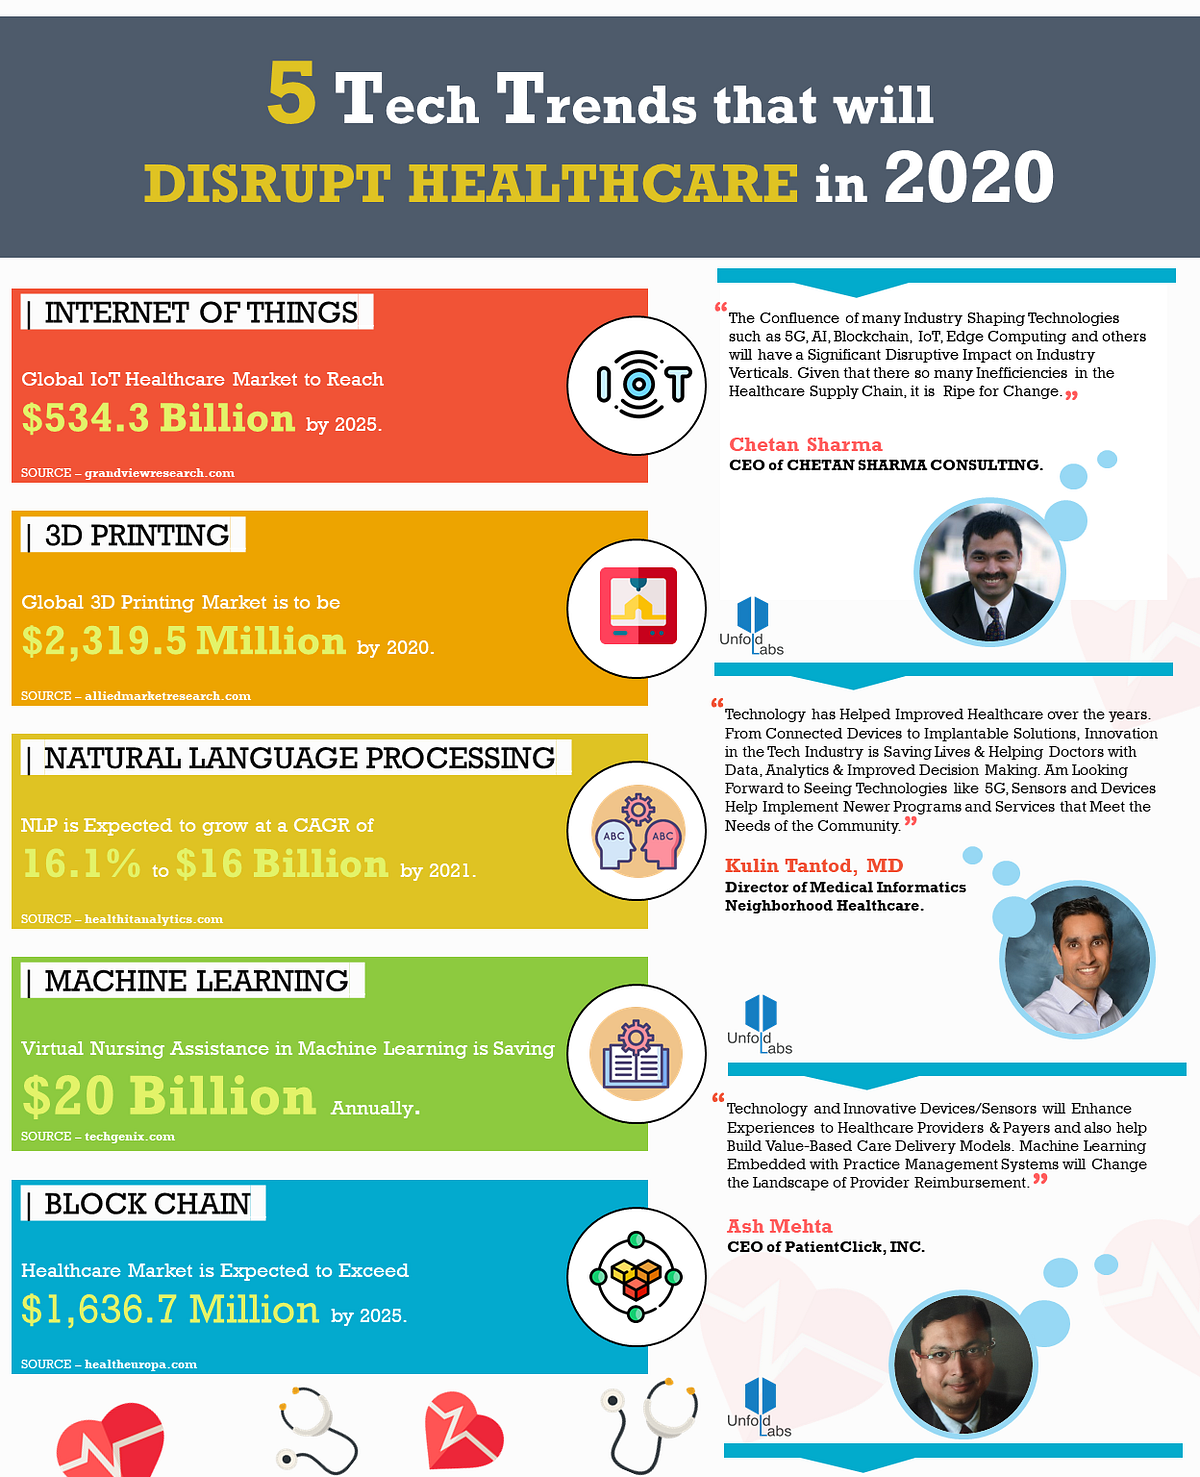 5 Tech Trends that will Disrupt Healthcare in 2020